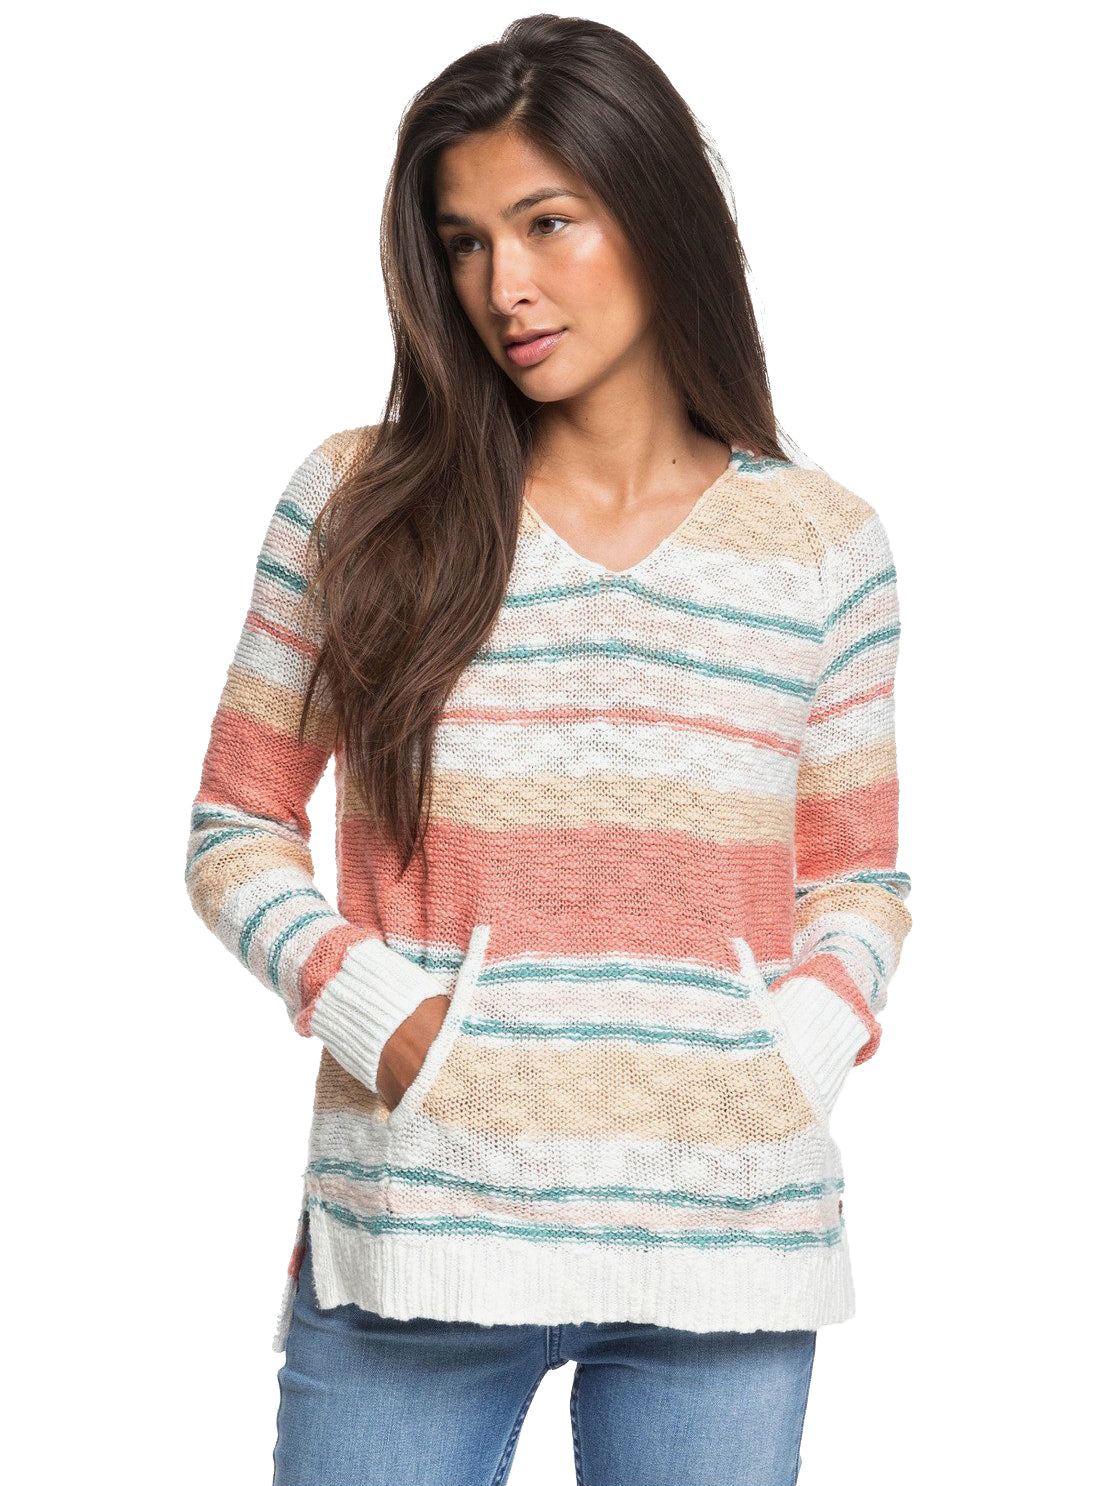 Roxy Airport Vibes Stripe Sweater XWNW L